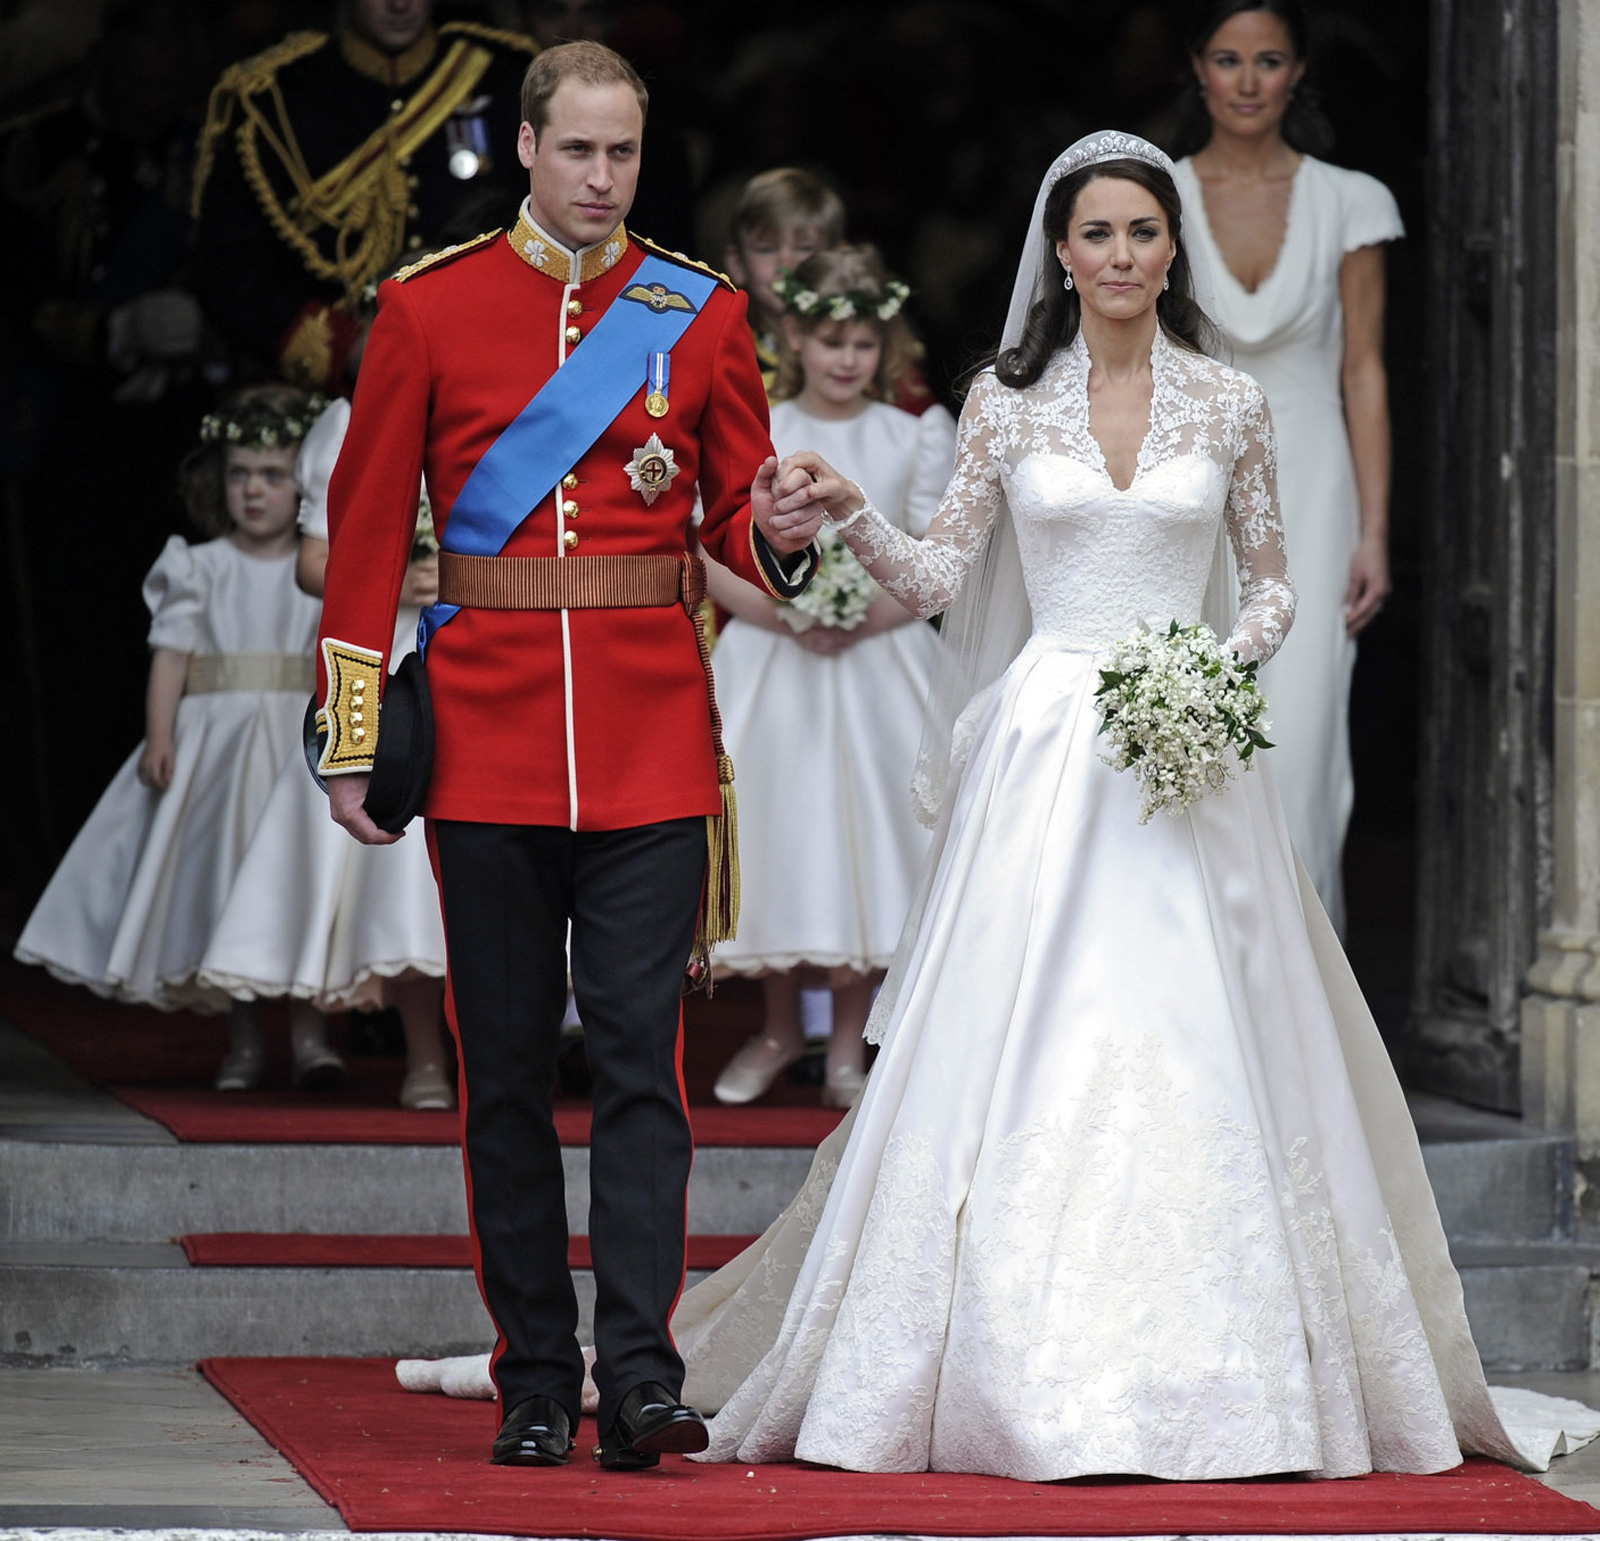 The Royal Wedding: Stunning Images Of Kate And William's Historic Ceremony